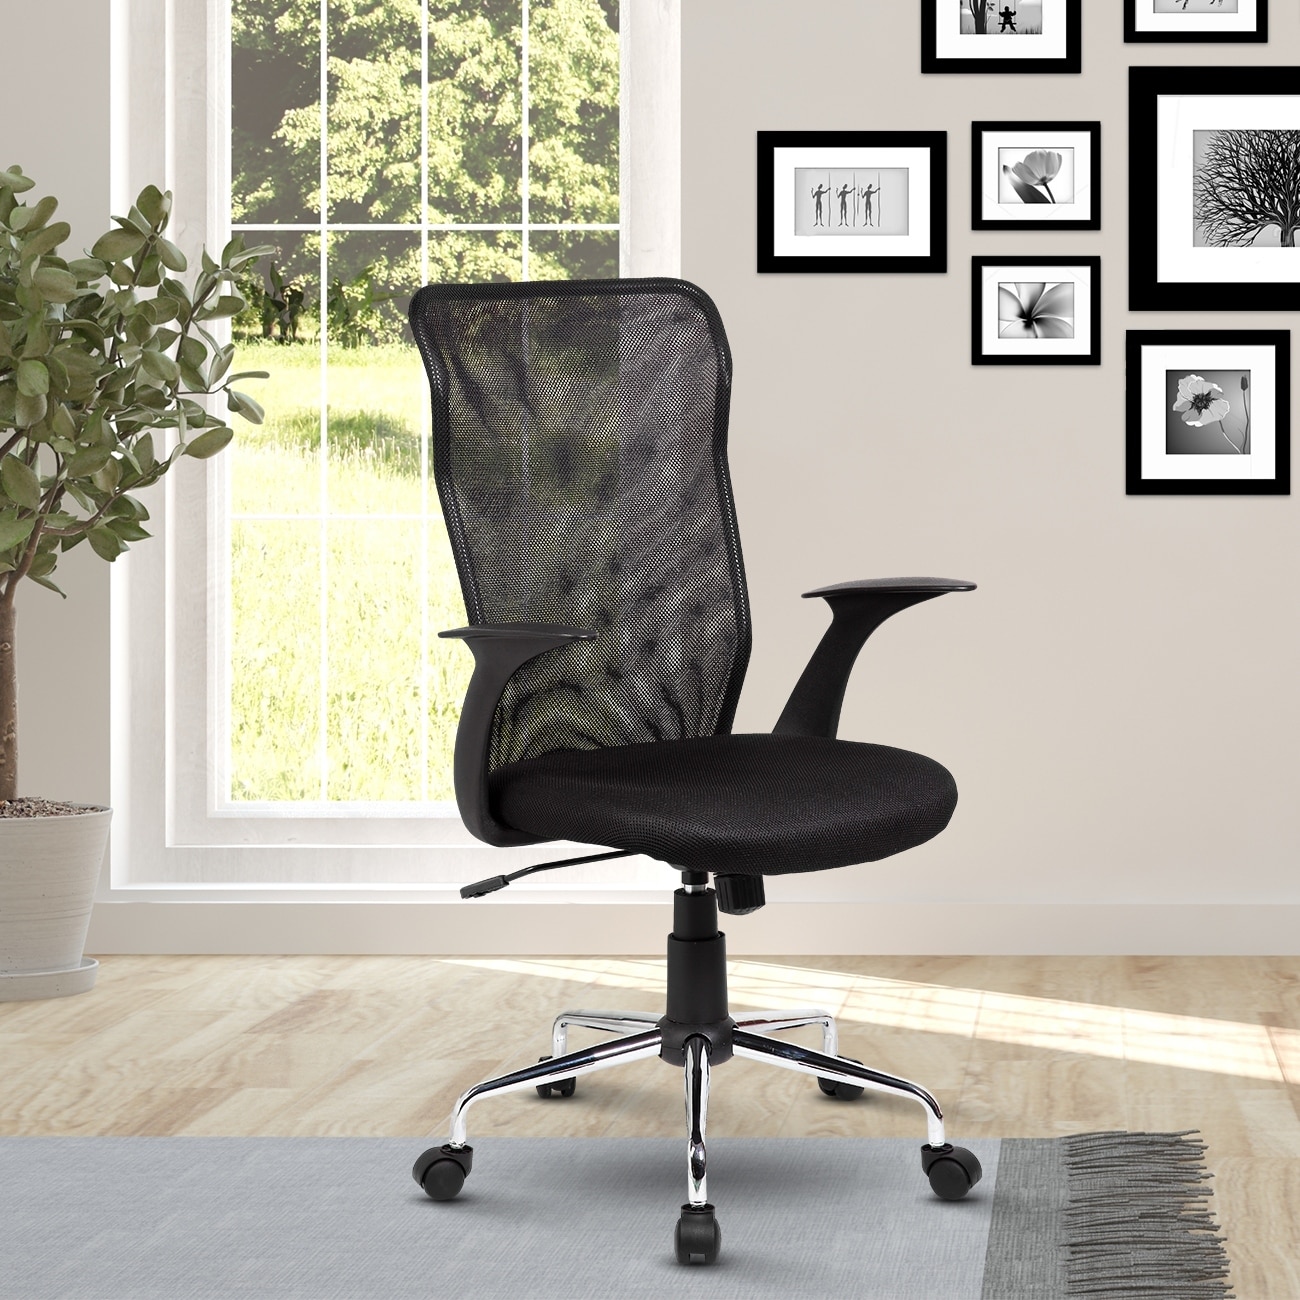 https://ak1.ostkcdn.com/images/products/is/images/direct/8089405a60562d8ec595b49e72ca8fd87477c6c8/Office-Chair-Mid-Back-Ergonomic-Mesh-Computer-Desk-Chair-with-Lumbar-Support-and-Armrest%2C-Executive-Height-Adjustable-Task-Chair.jpg